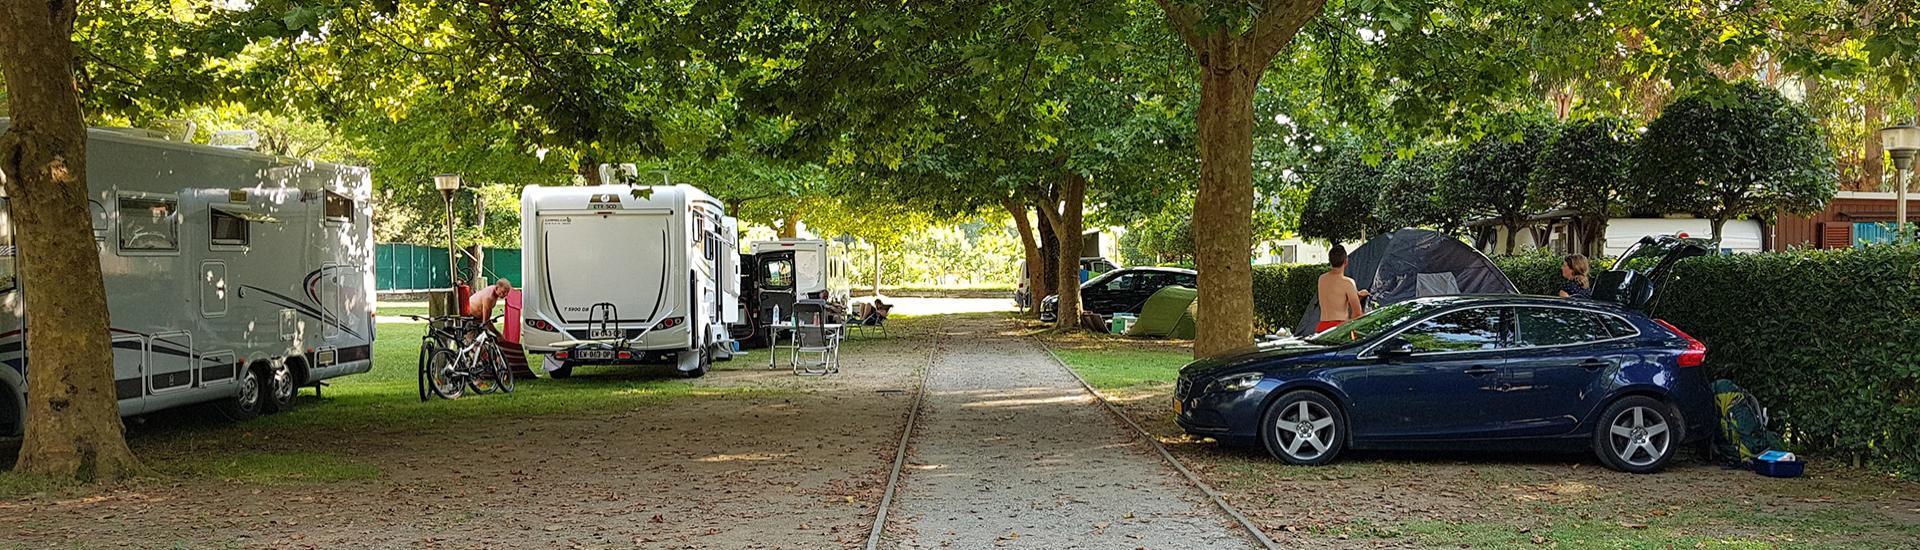 Camping with RVs, cars, and tents under shady trees.